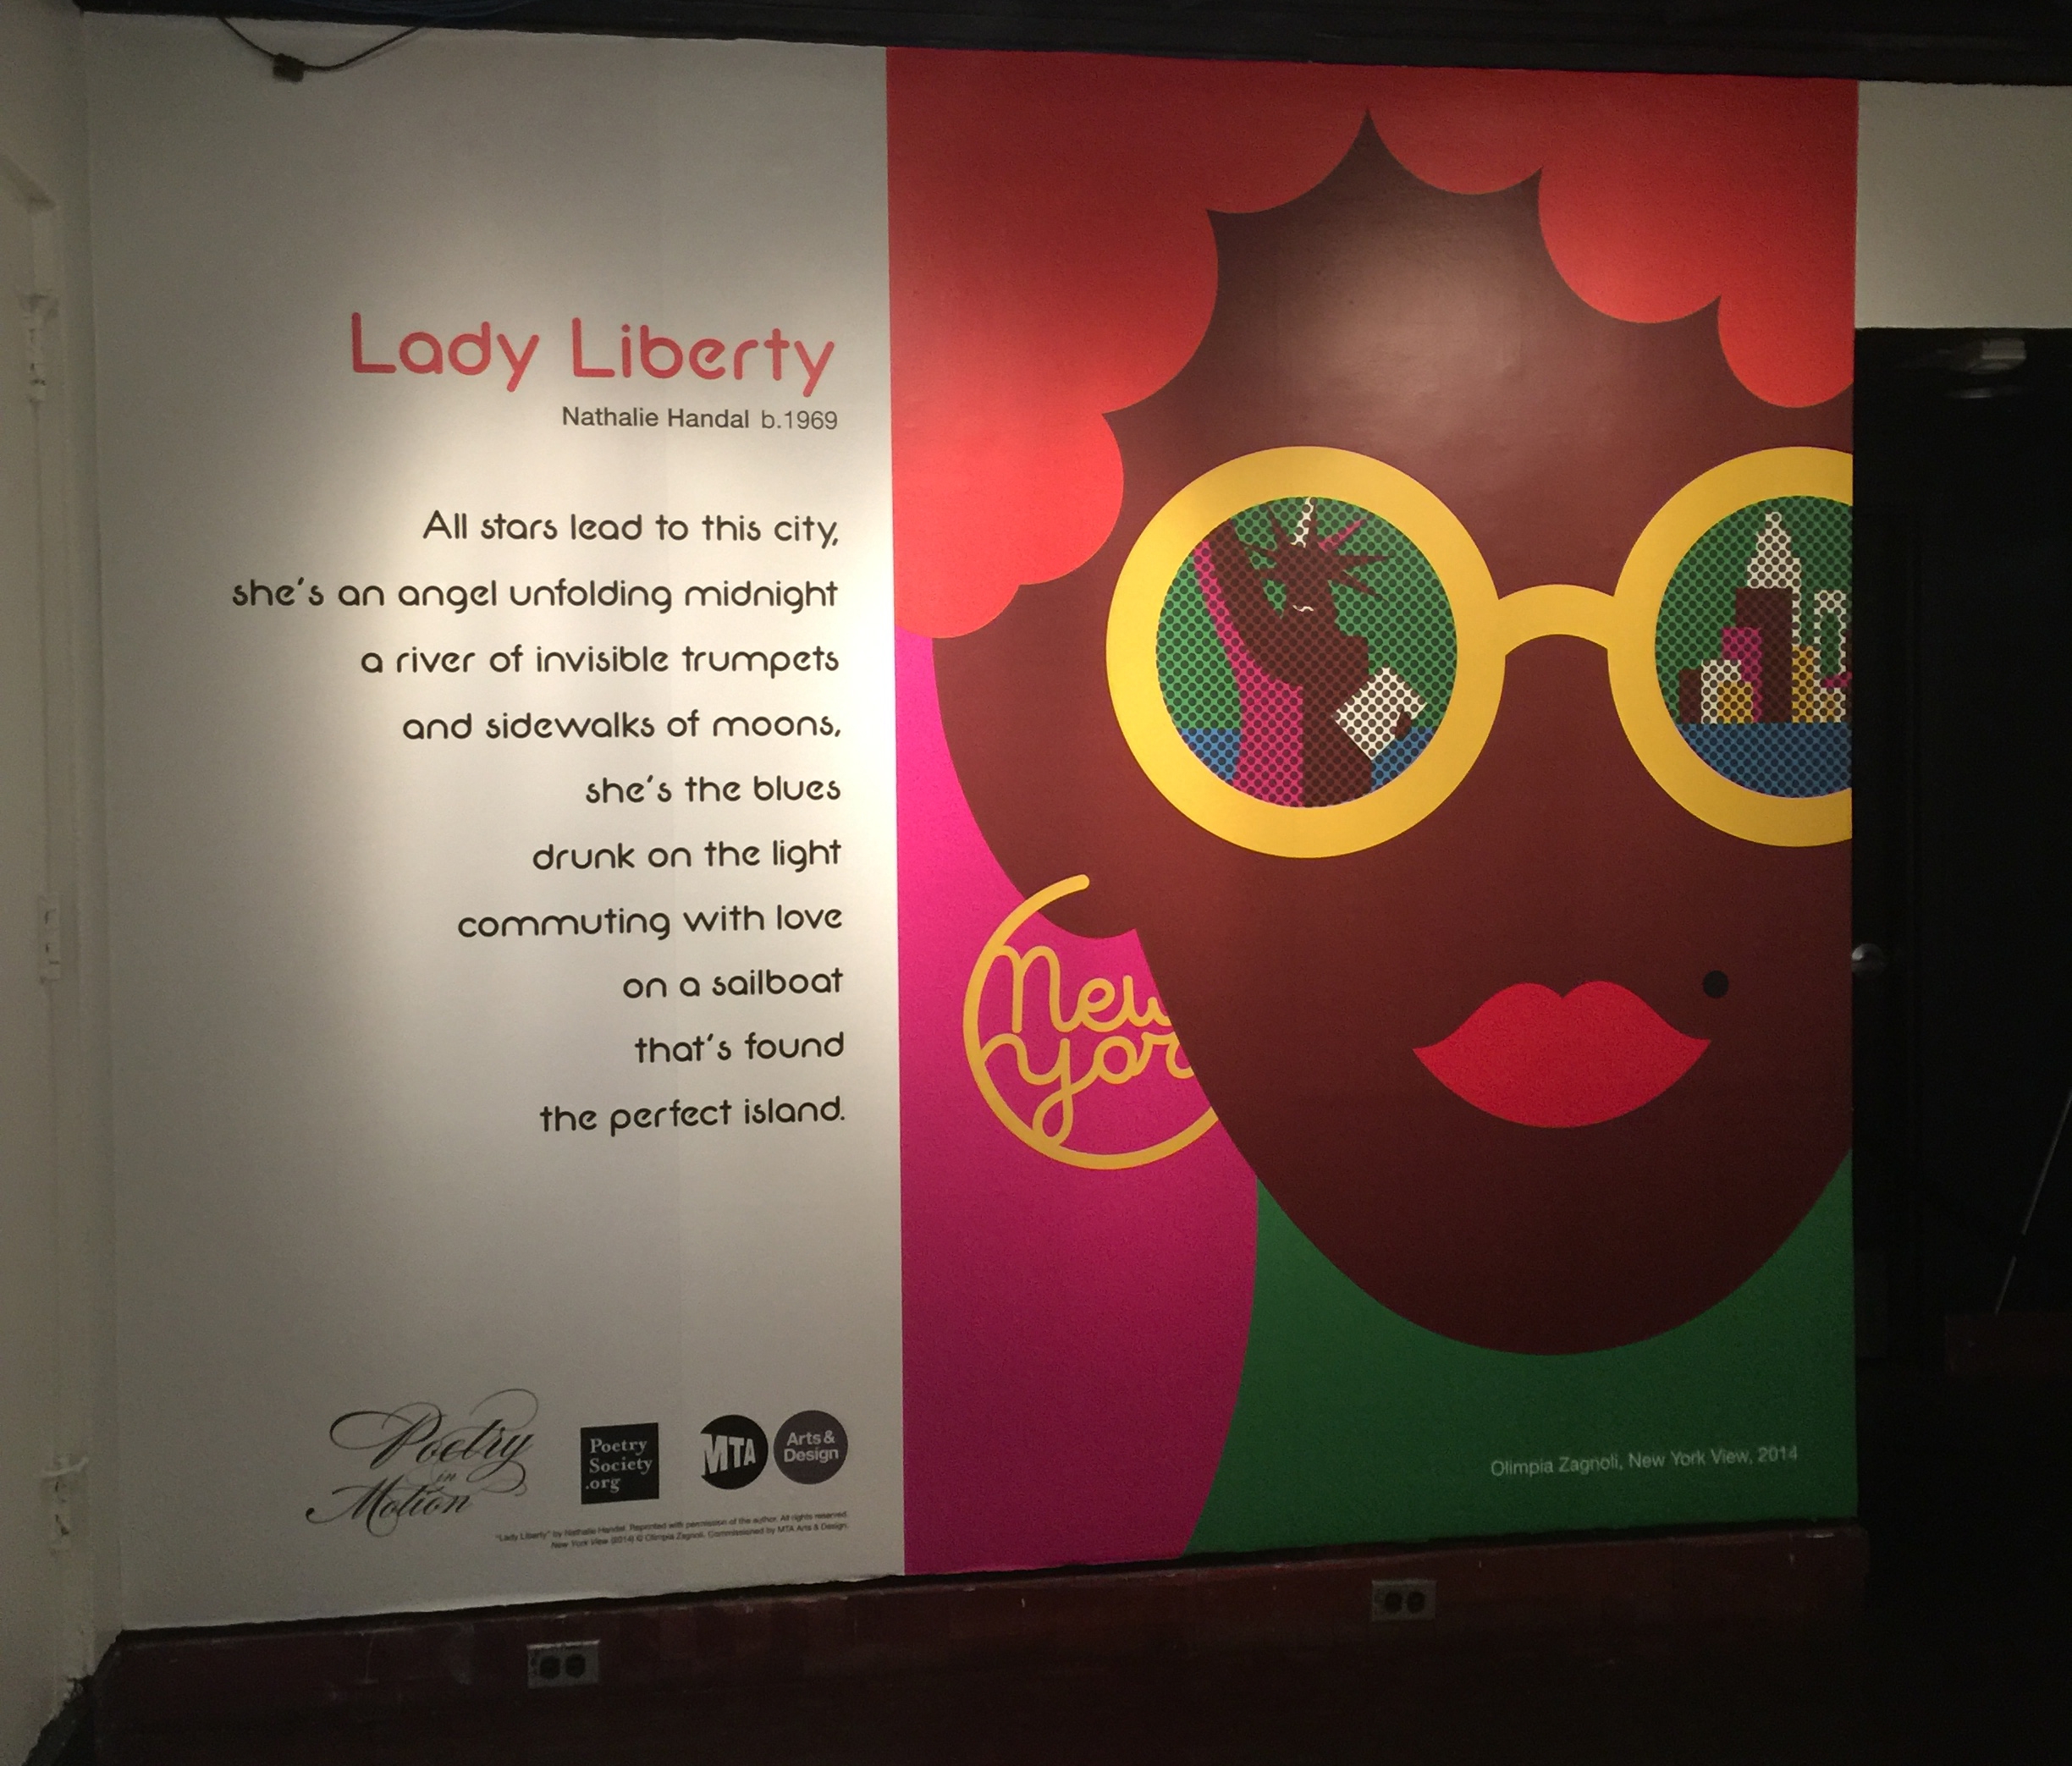 Image of Nathalie Handal's poem "Lady Liberty" in Grand Central